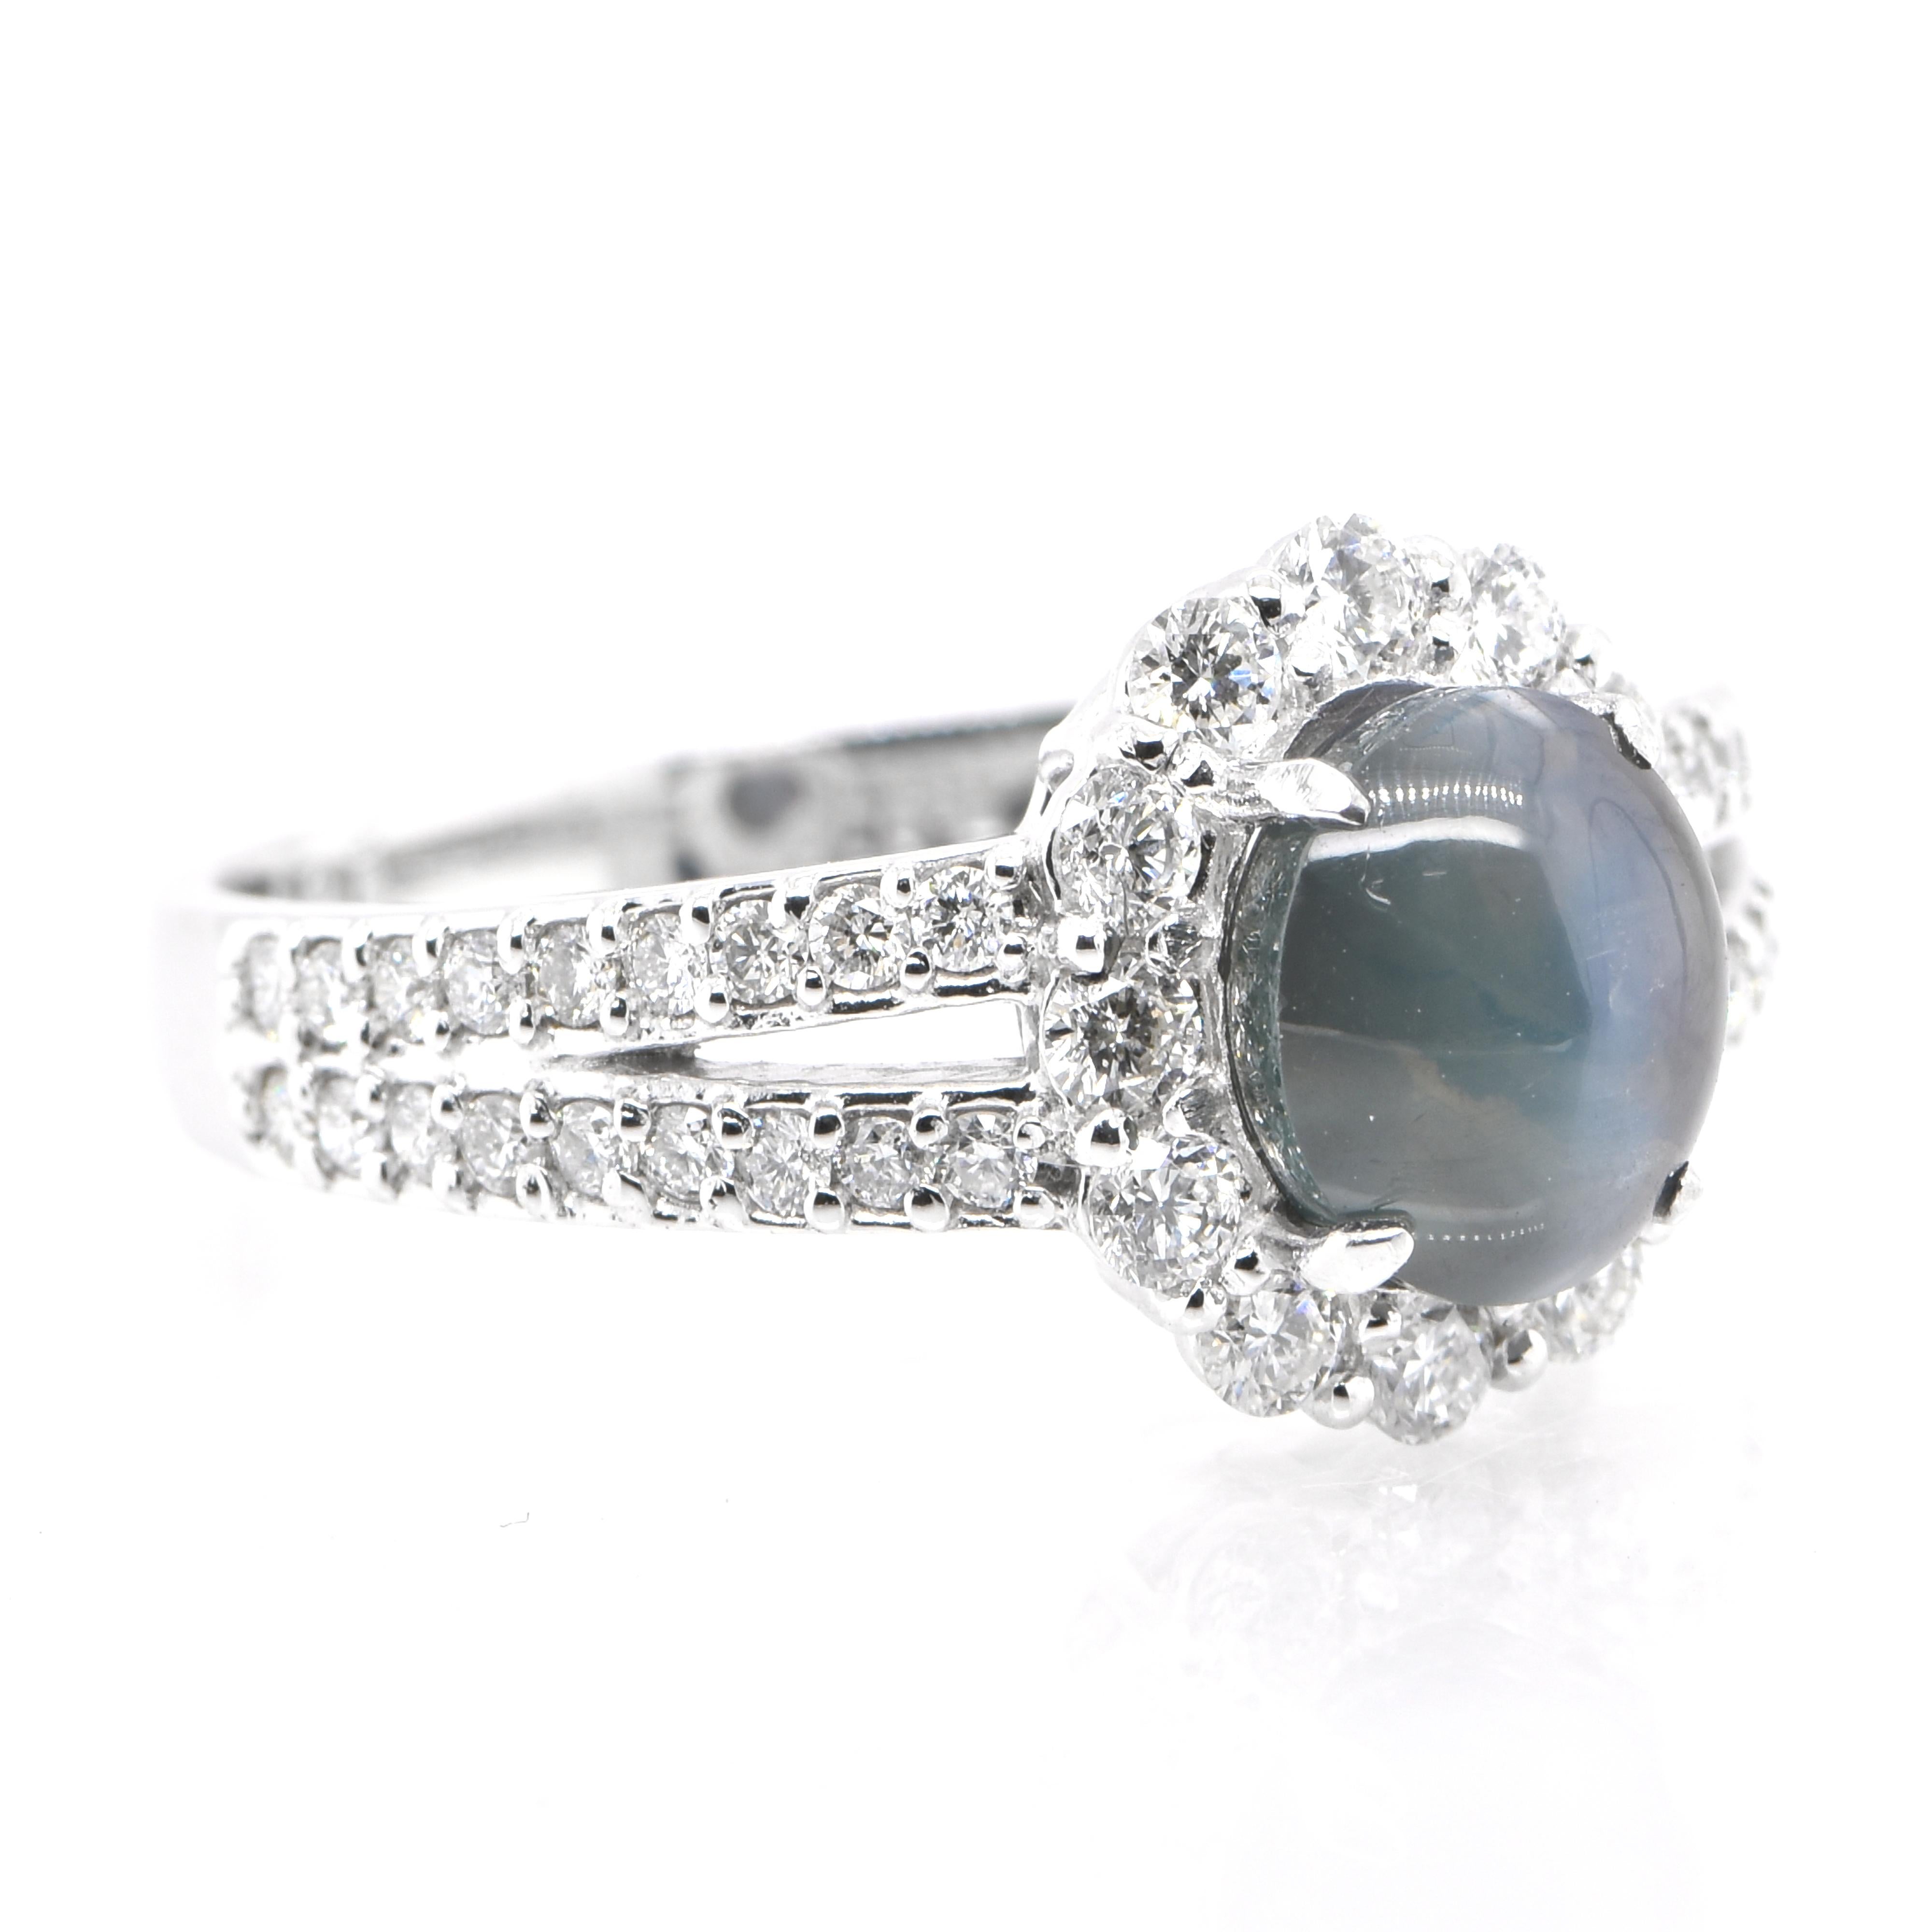 Cabochon 1.95 Carat Natural Alexandrite Cat's Eye and Diamond Halo Ring Set in Platinum For Sale